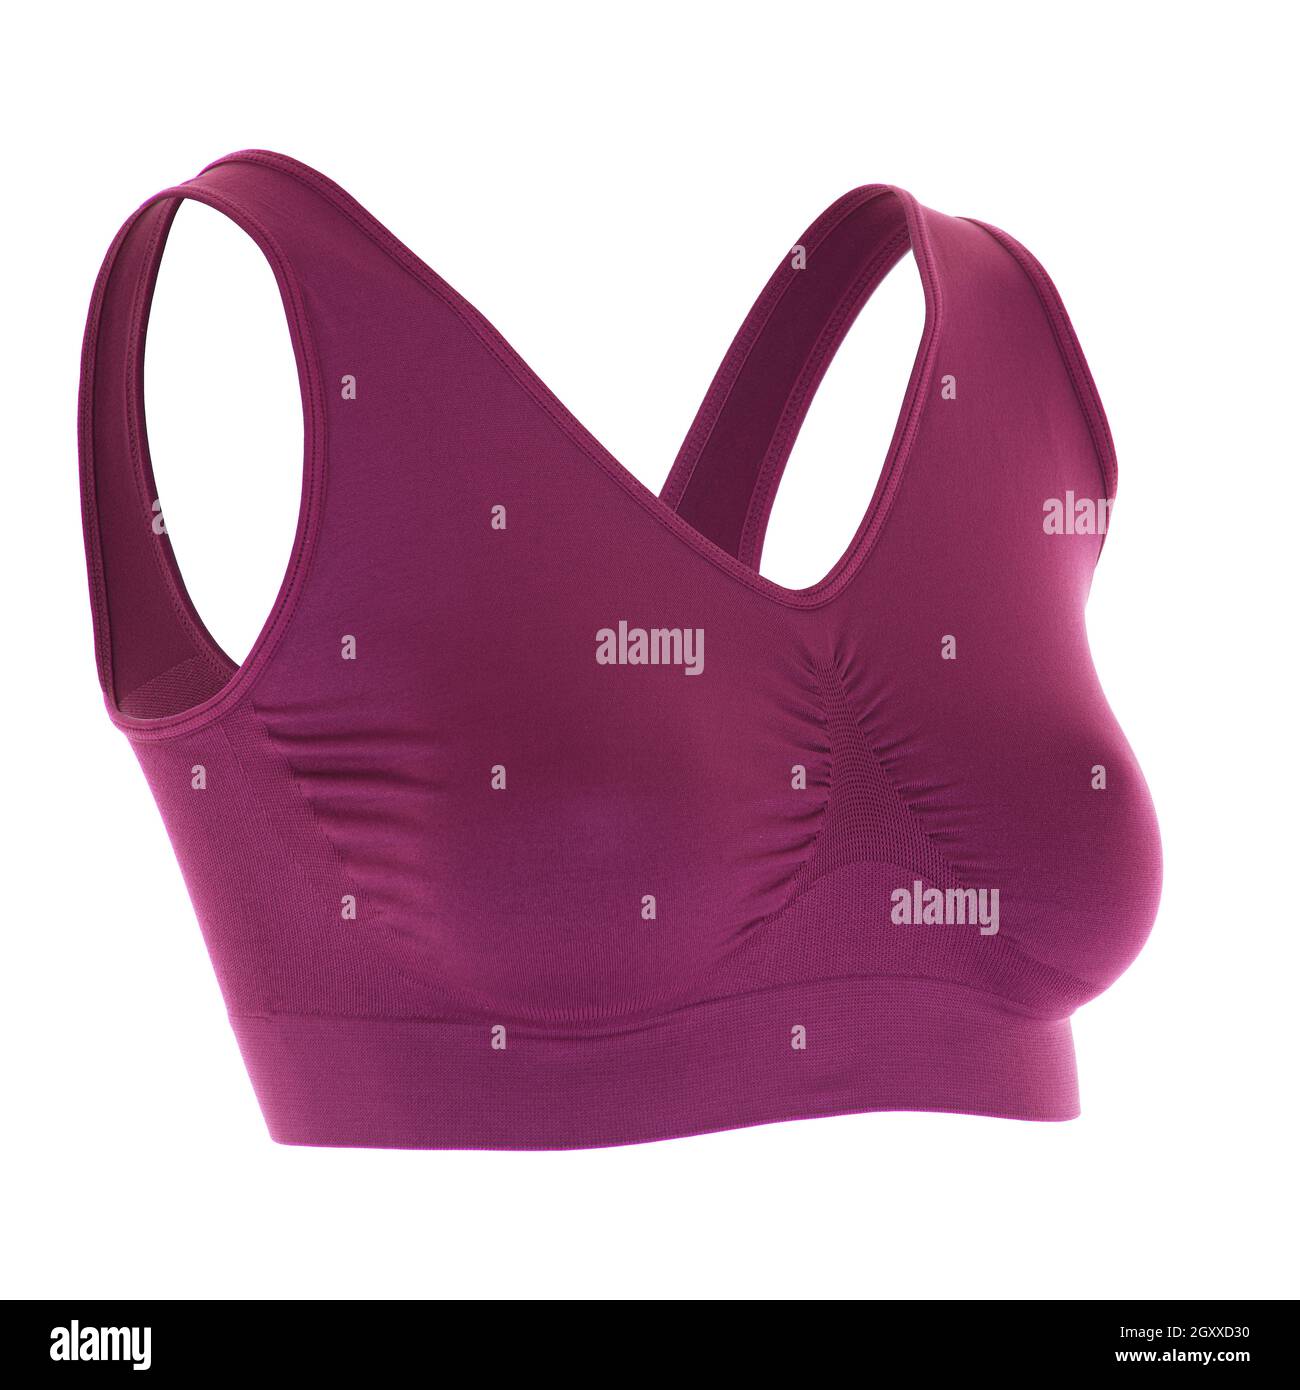 https://c8.alamy.com/comp/2GXXD30/womens-sports-bra-red-invisible-ghost-mannequin-with-a-clipping-path-2GXXD30.jpg